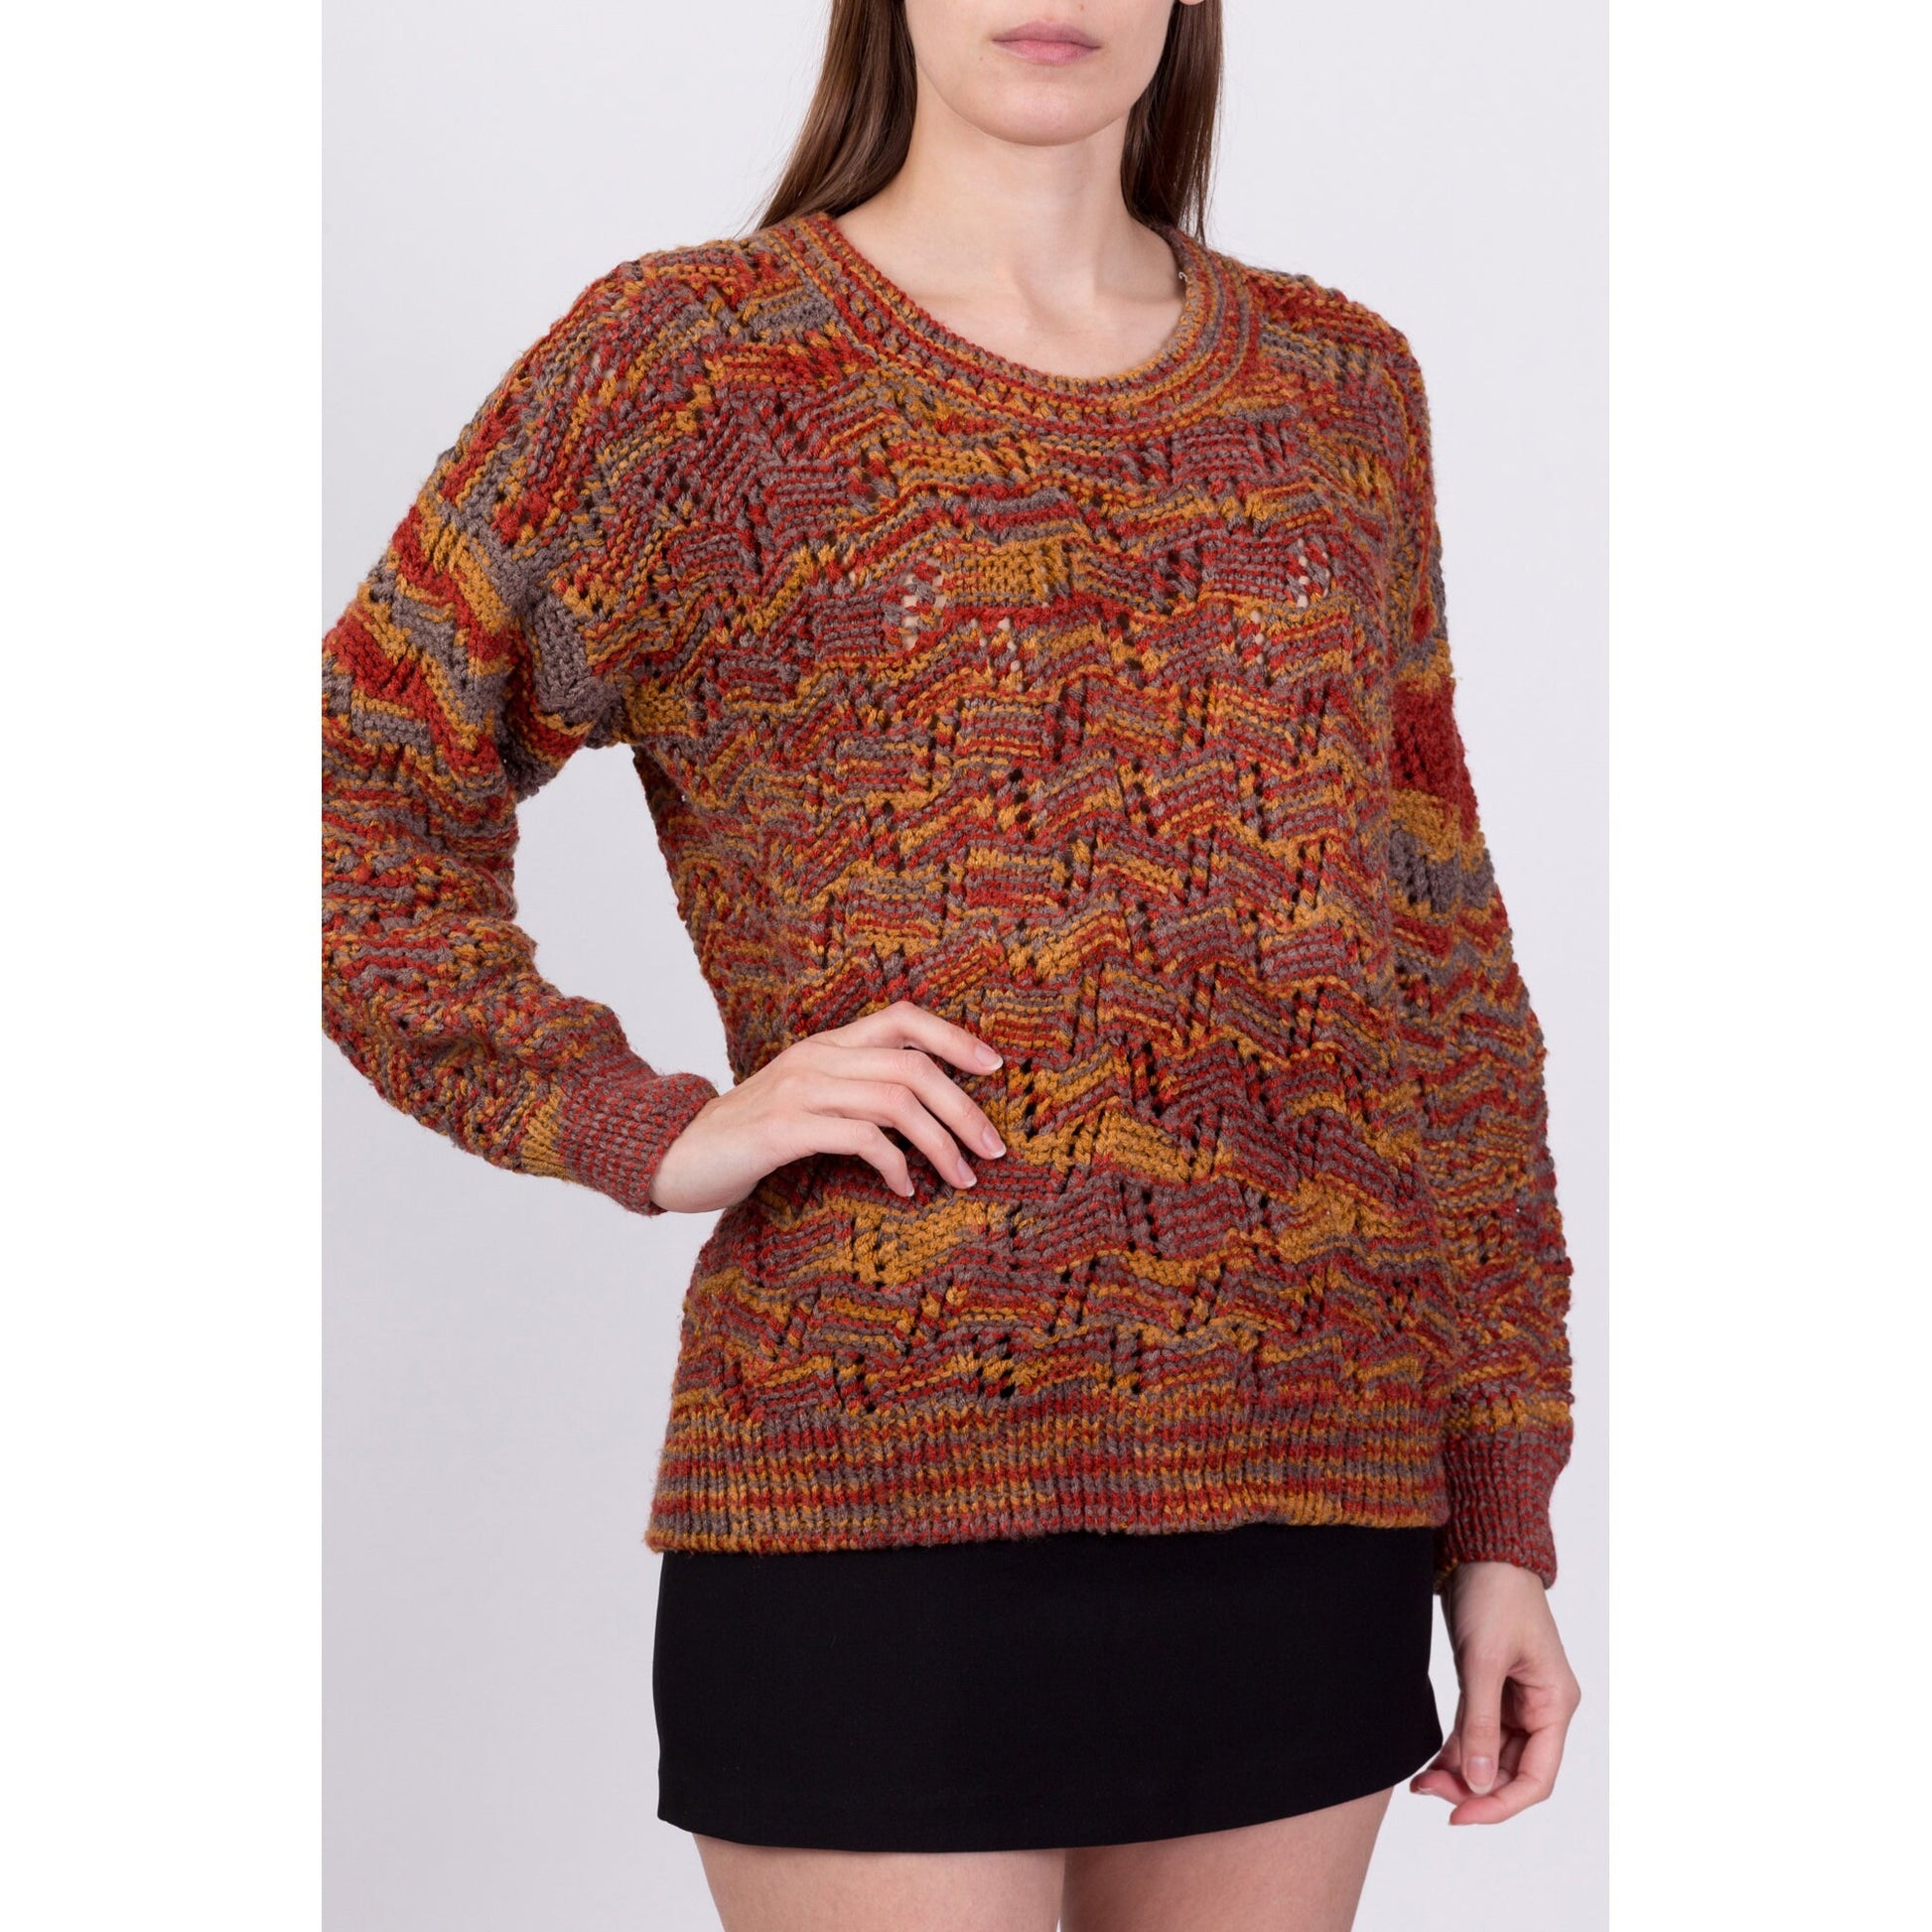 Vintage Abstract Knit Sweater - Medium to Large 